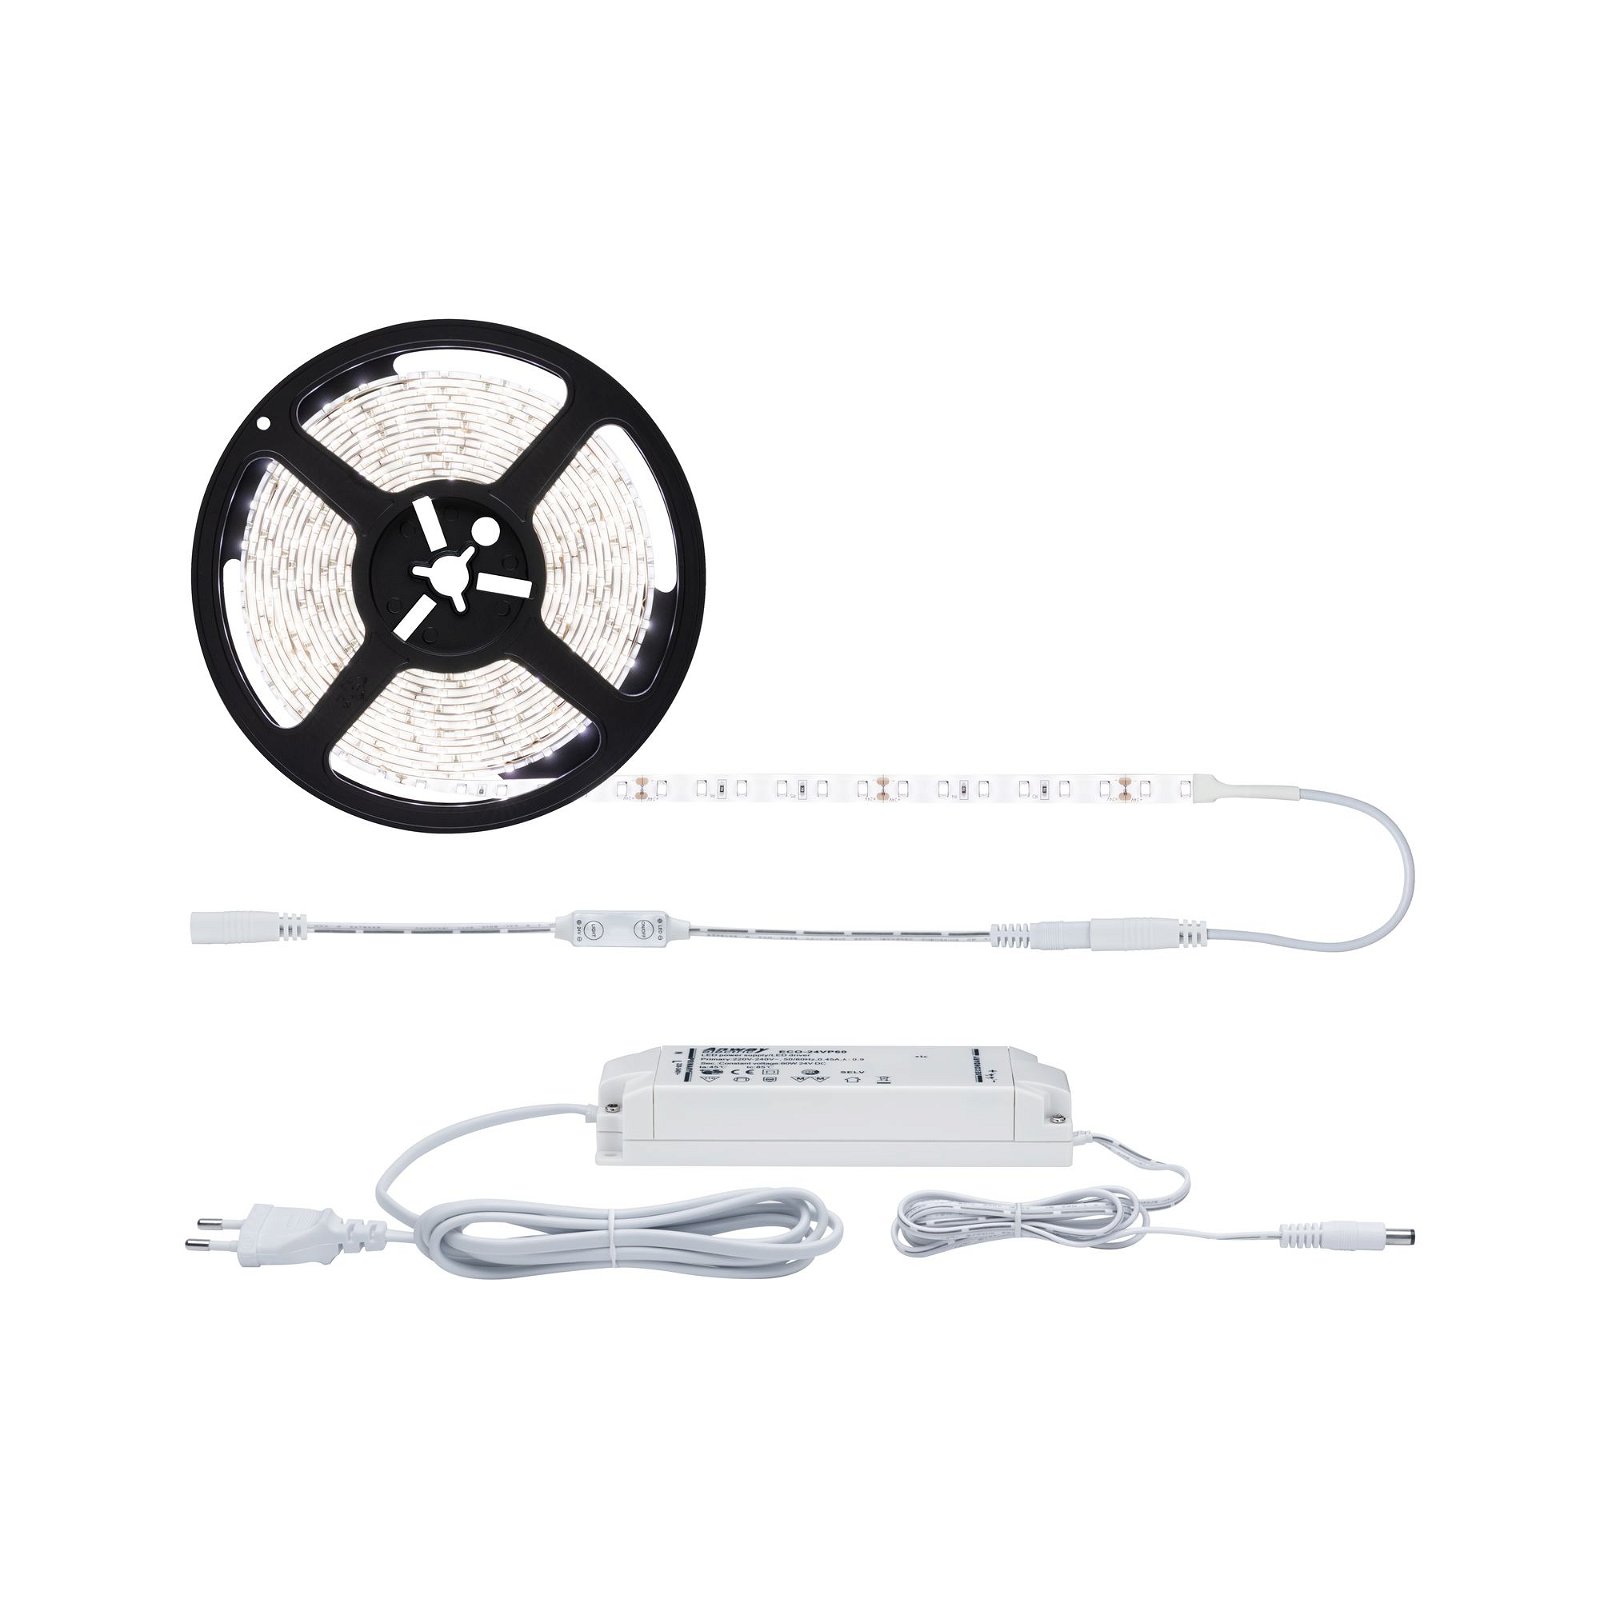 SimpLED Power LED Strip Neutraal wit incl. Dimm/Switch Basisset 5m gecoat 50W 5500lm 4000K 60VA